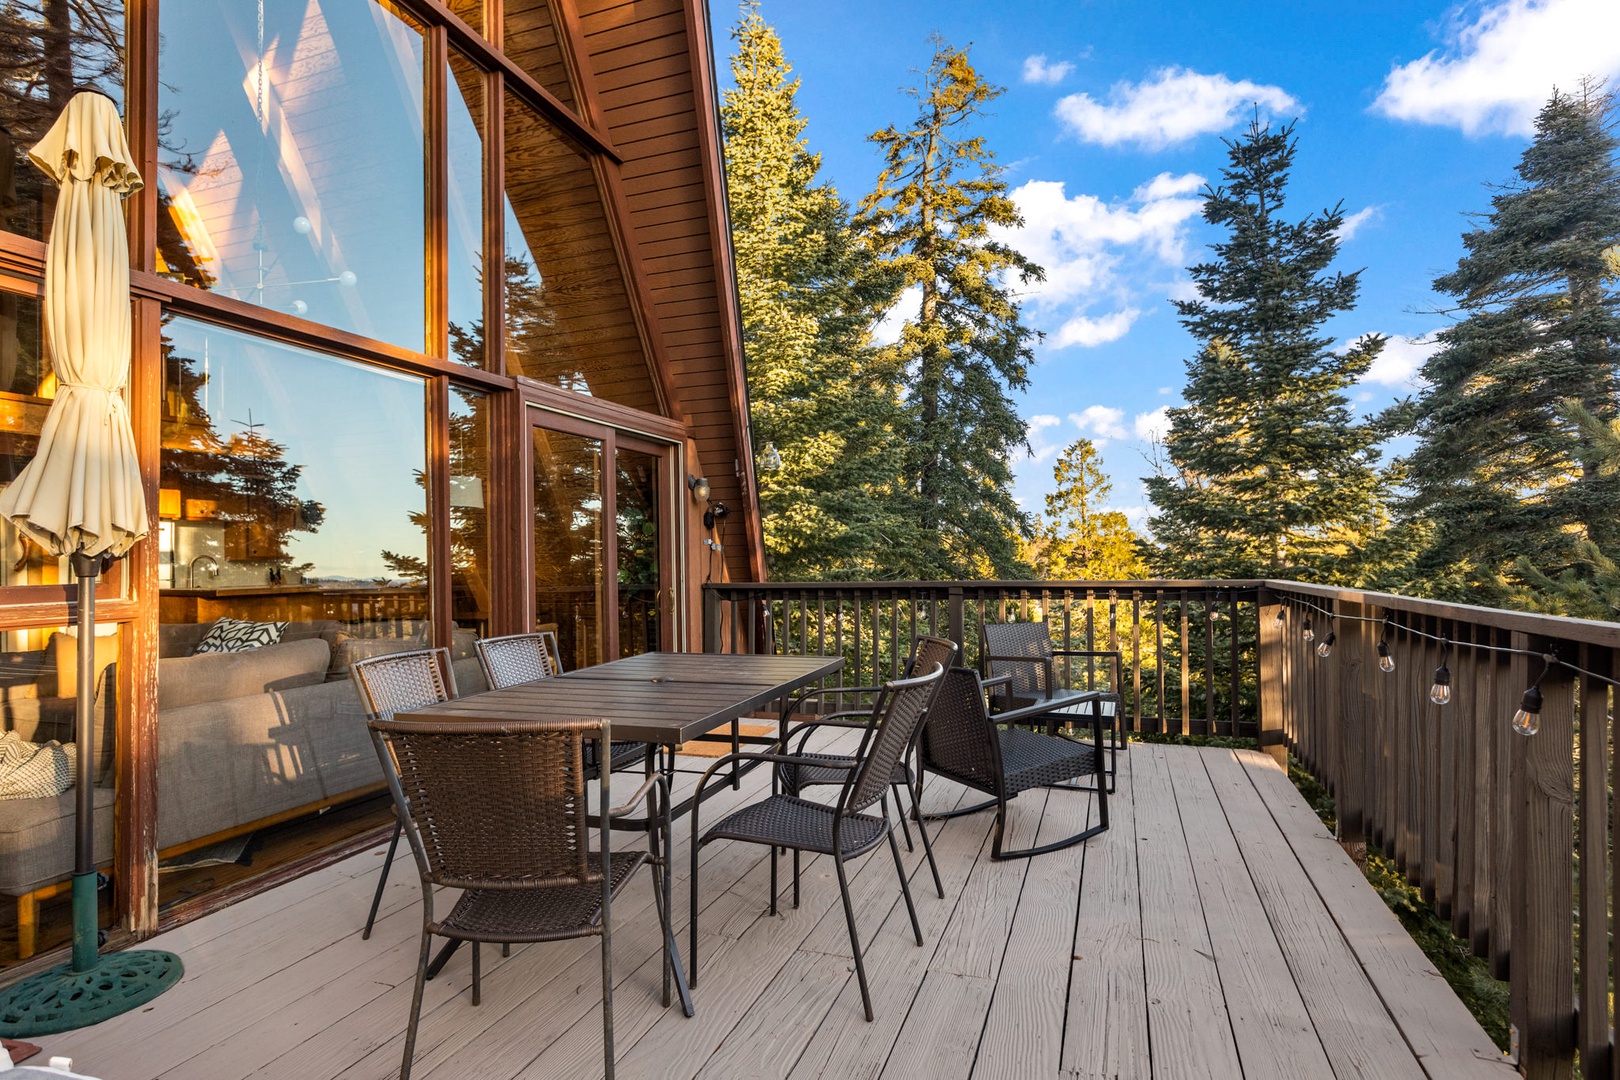 Lounge the day away or grill up a feast in the fresh air on the large back deck